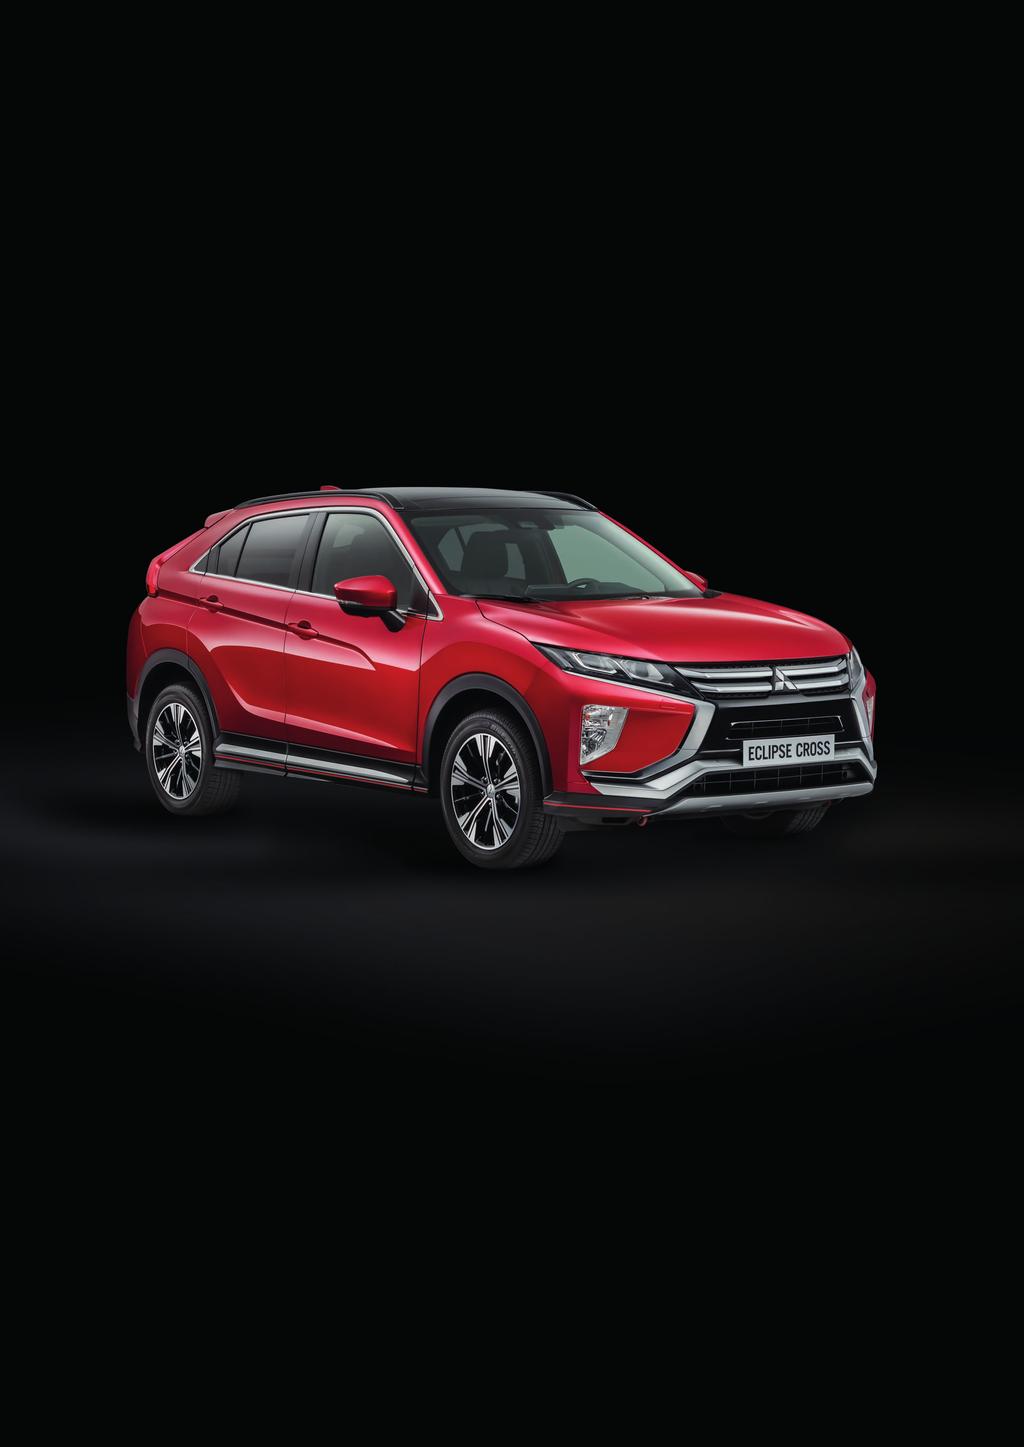 KEY FEATURES Available from launch in limited numbers, the Eclipse Cross First Edition truly is an exceptional vehicle.